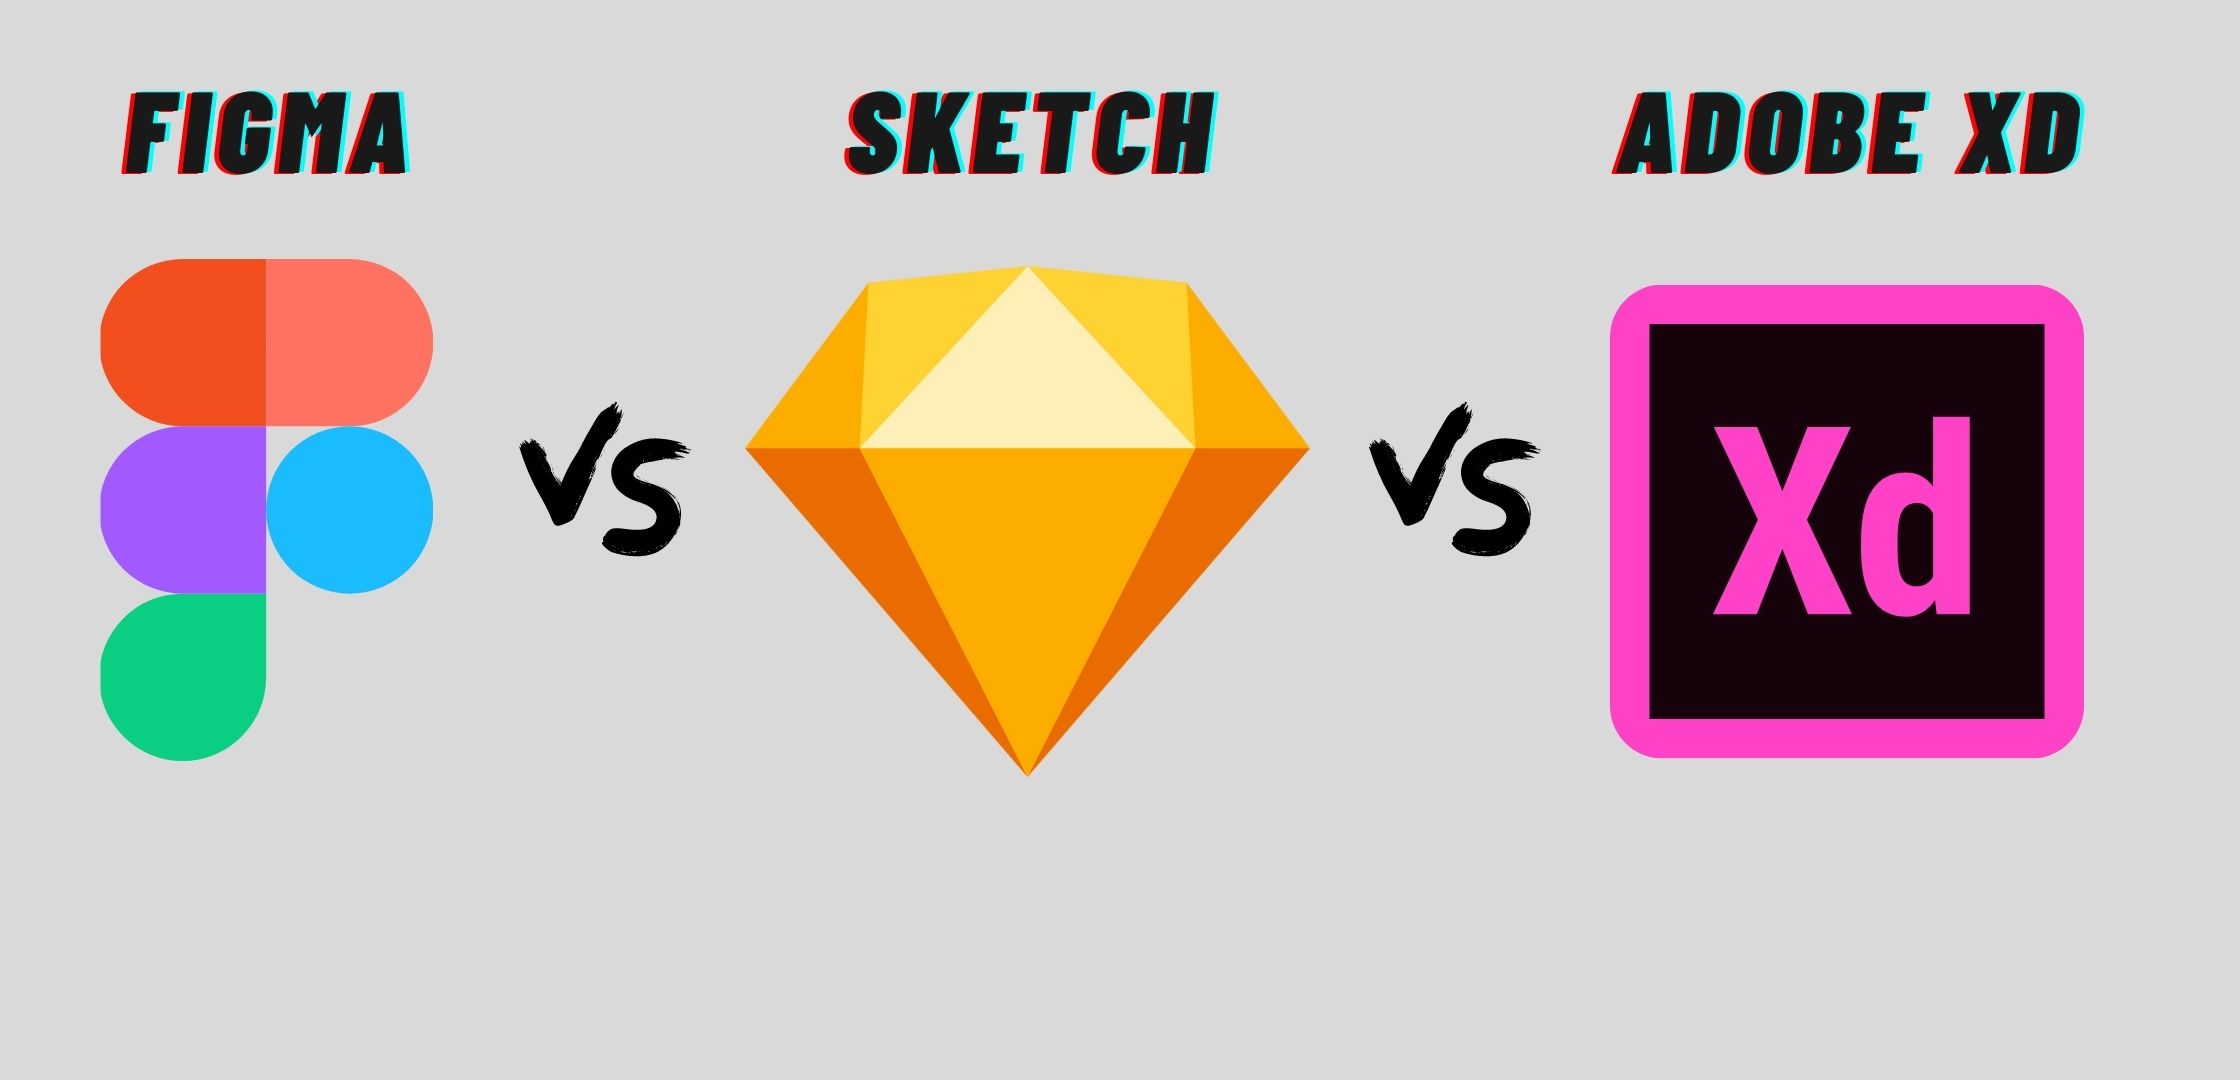 How to Convert Sketch to Adobe XD and Open Sketch File in XD